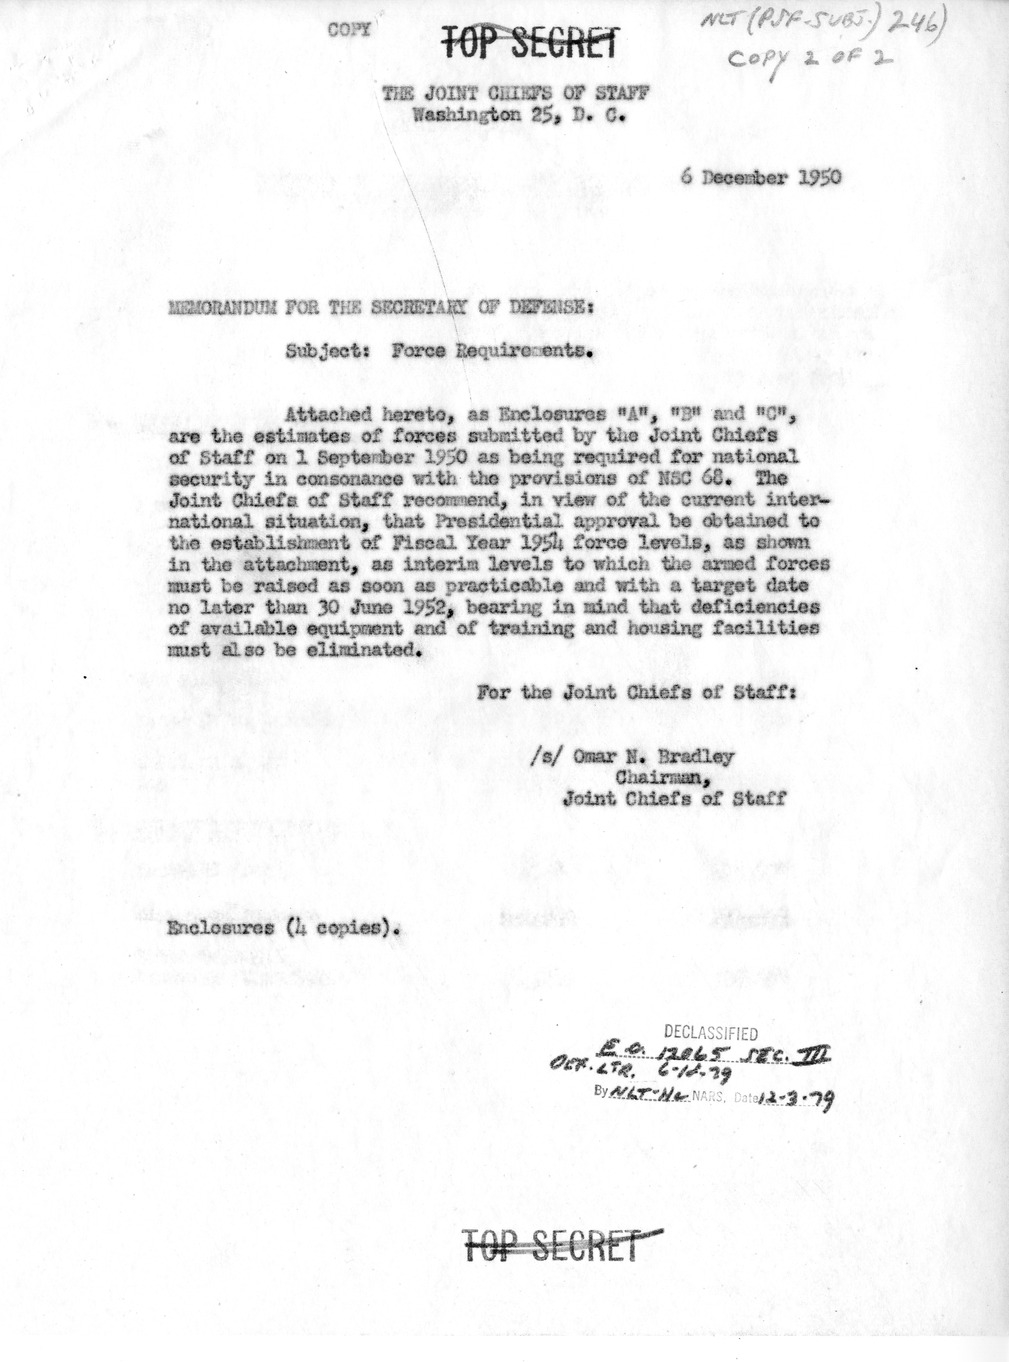 Memorandum from Secretary of Defense George Marshall to President Harry S. Truman with Attachments